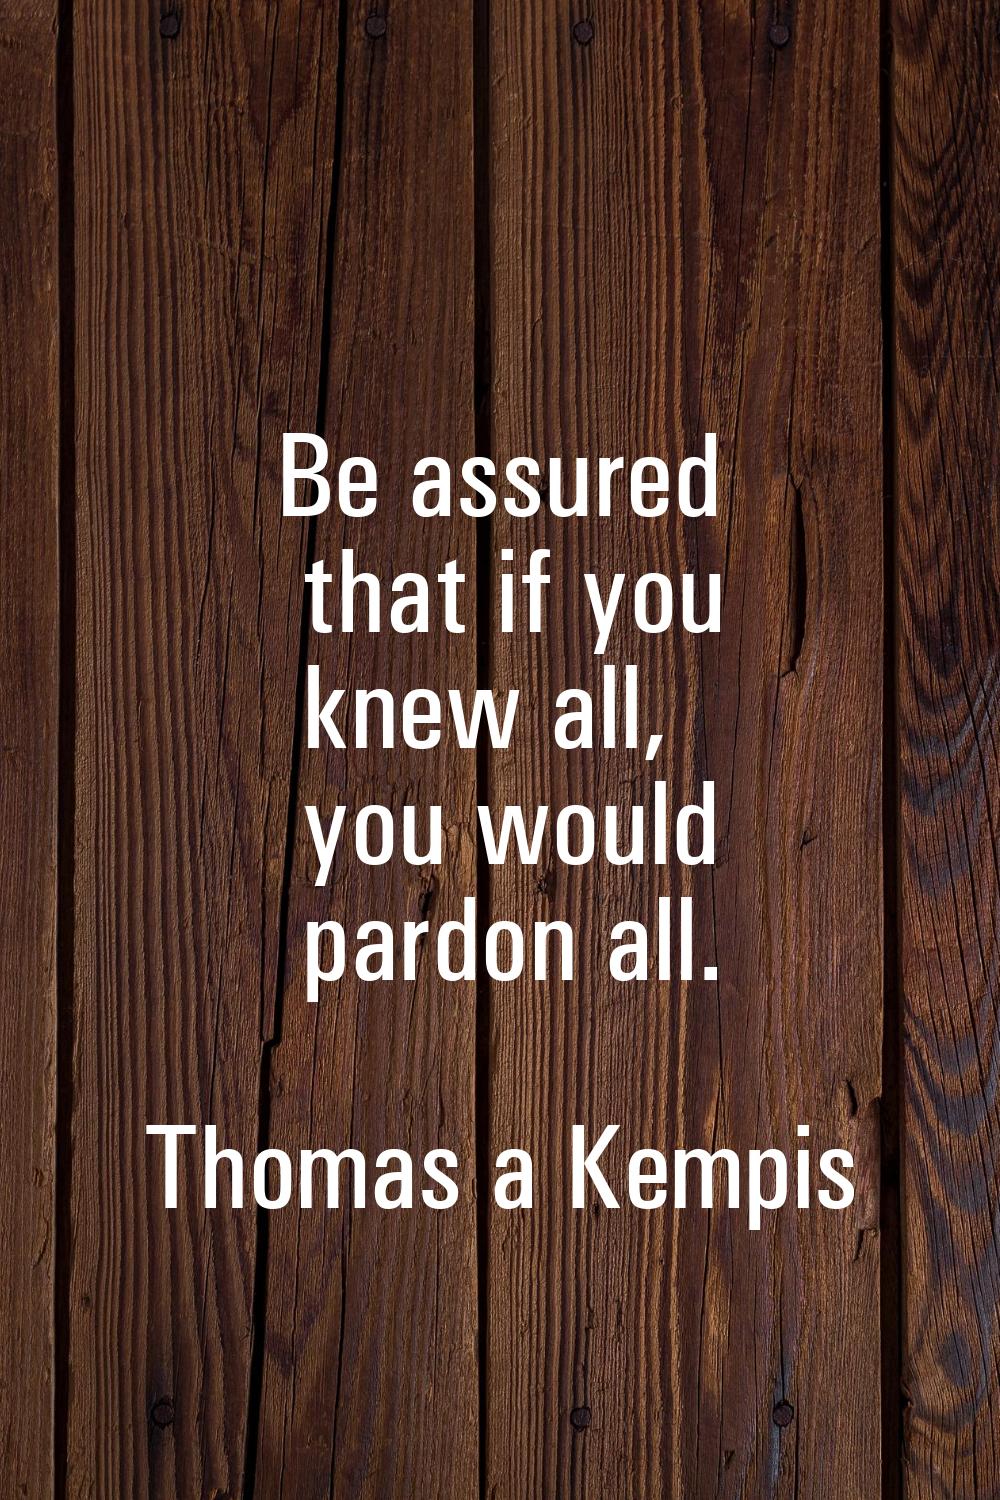 Be assured that if you knew all, you would pardon all.